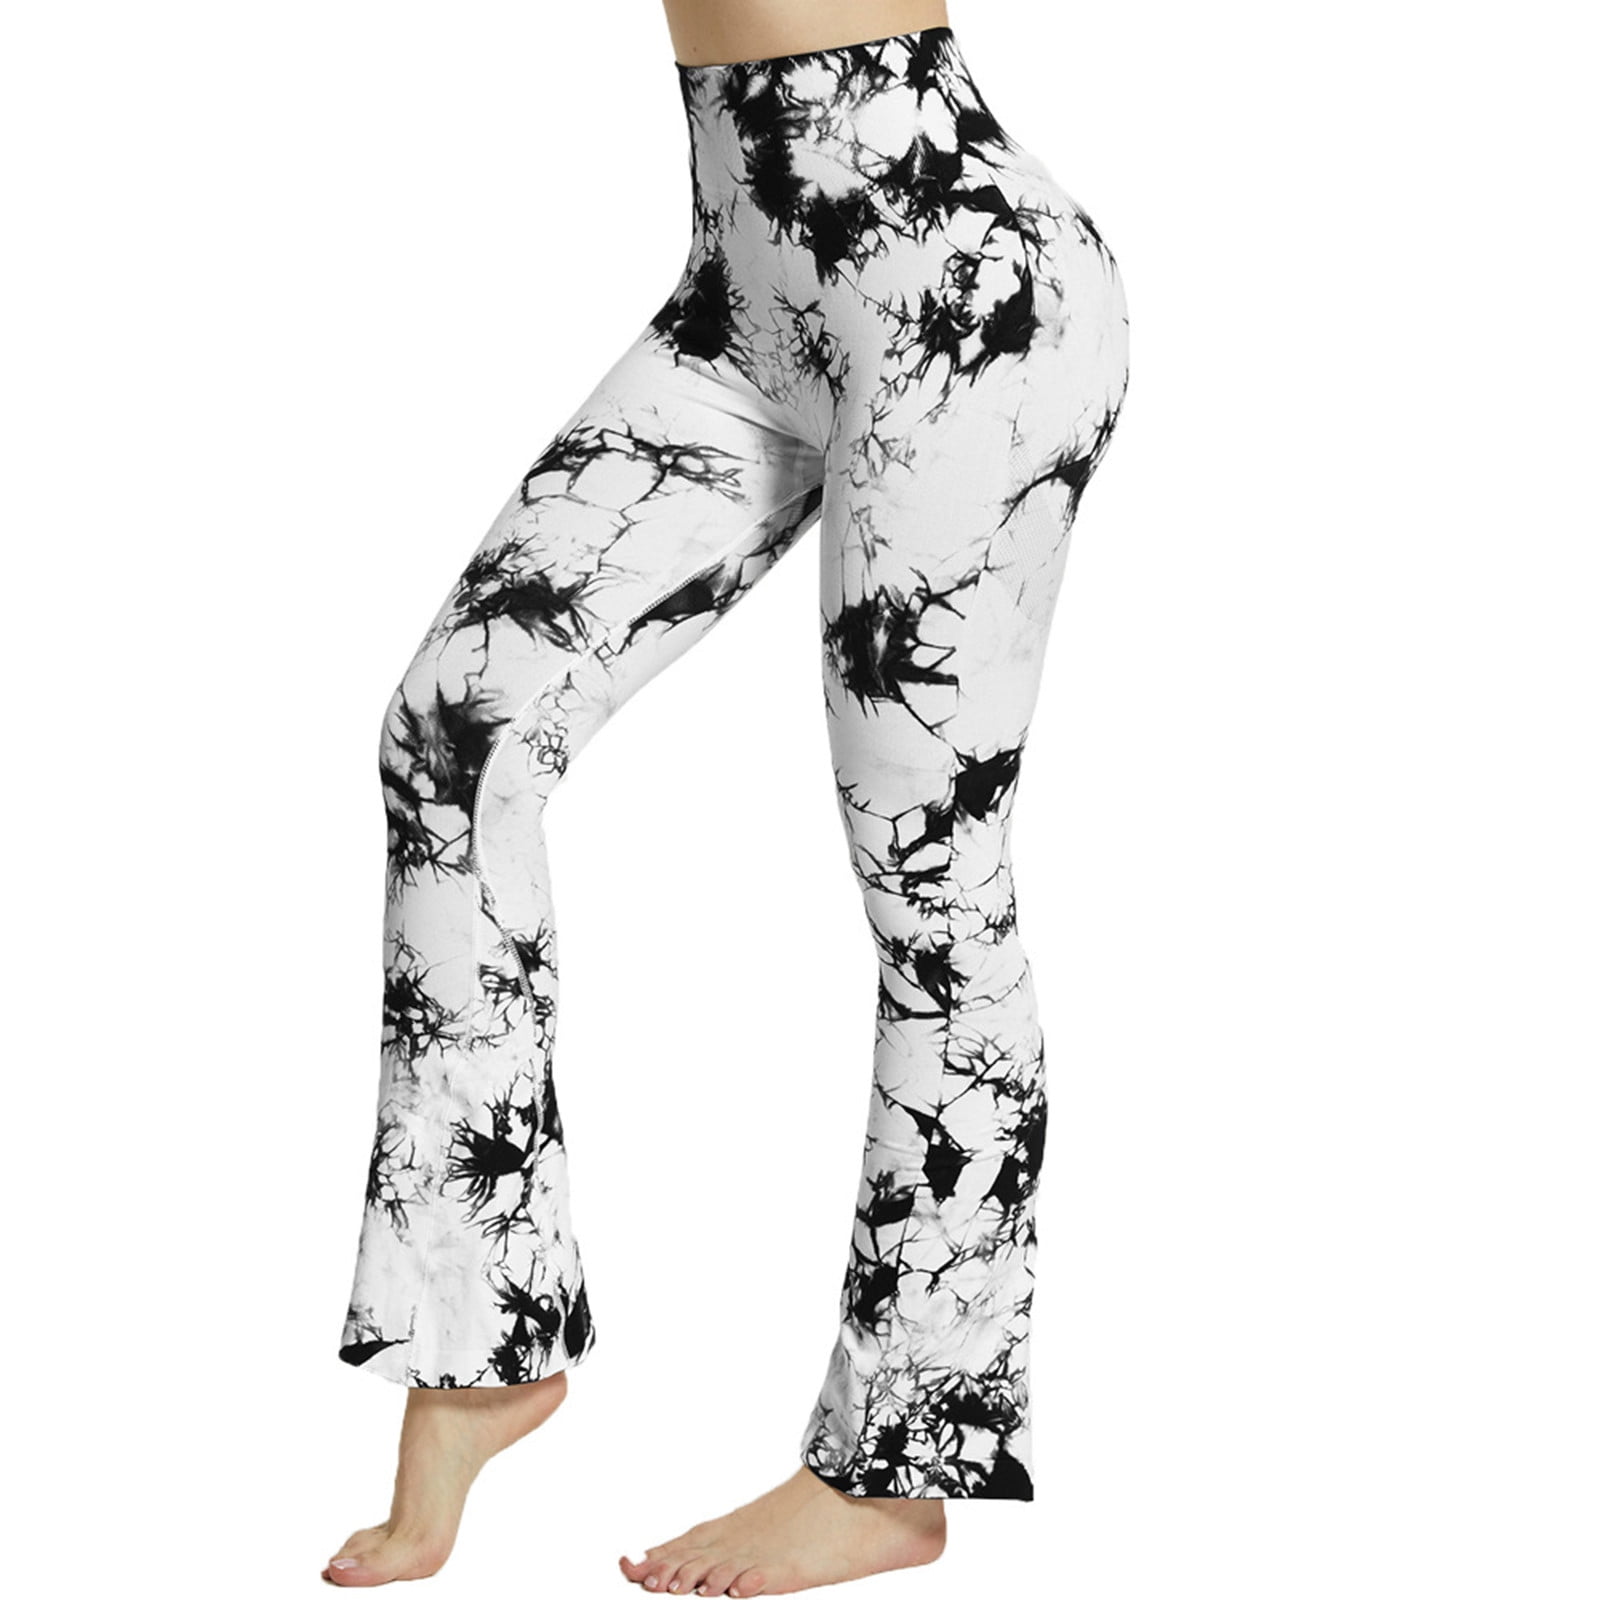 RYDCOT Tie Dye Flare Leggings for Women Scrunch Butt Lifting Workout  Leggings Seamless High Waisted Bootcut Yoga Sports Pants Trousers Sale 